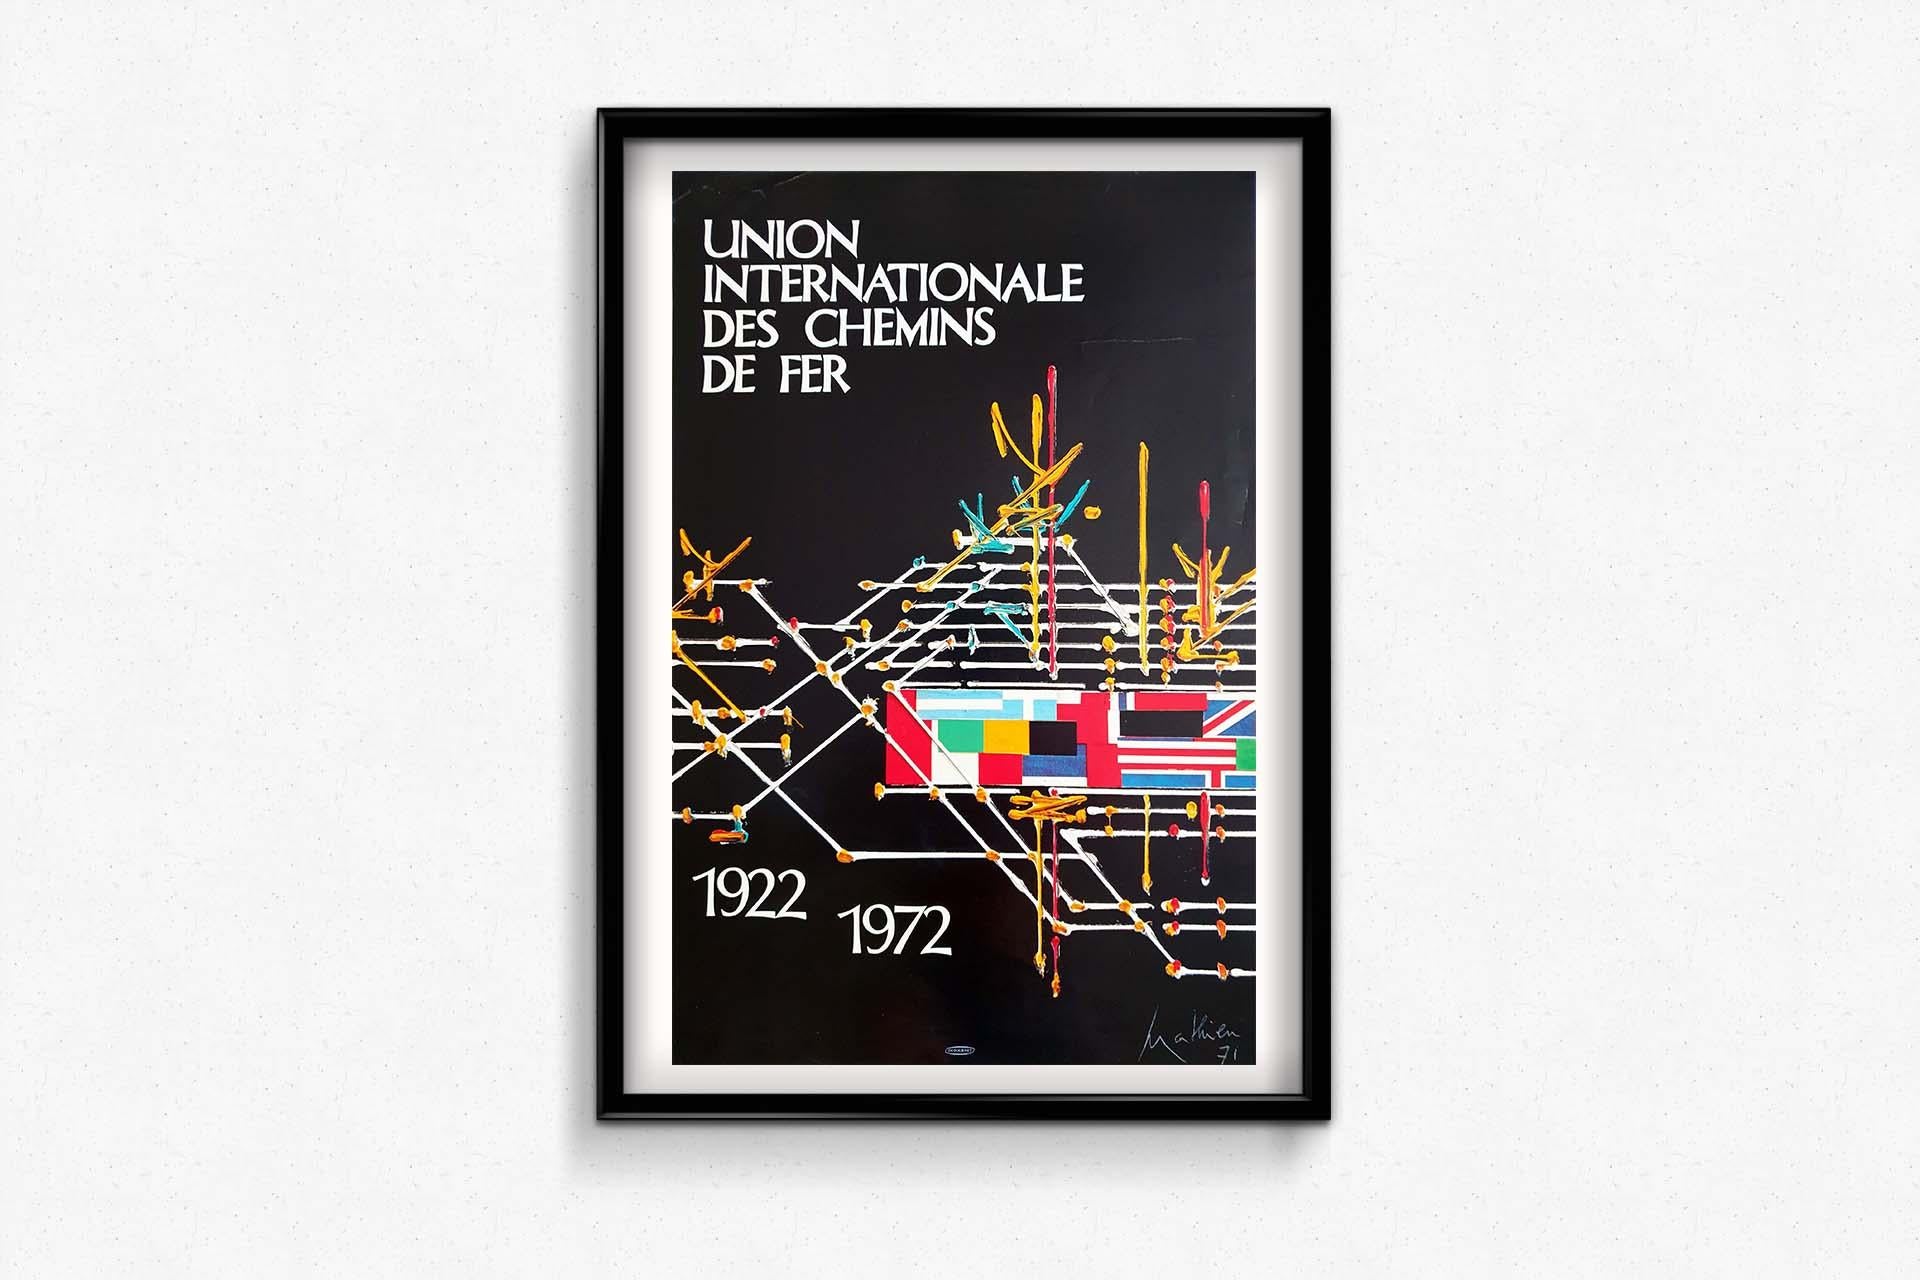 The 1971 original poster by Mathieu for the exhibition of the Union Internationale des Chemins de Fer (International Union of Railways) stands as a striking example of the fusion of artistic creativity and the world of transportation. This poster,